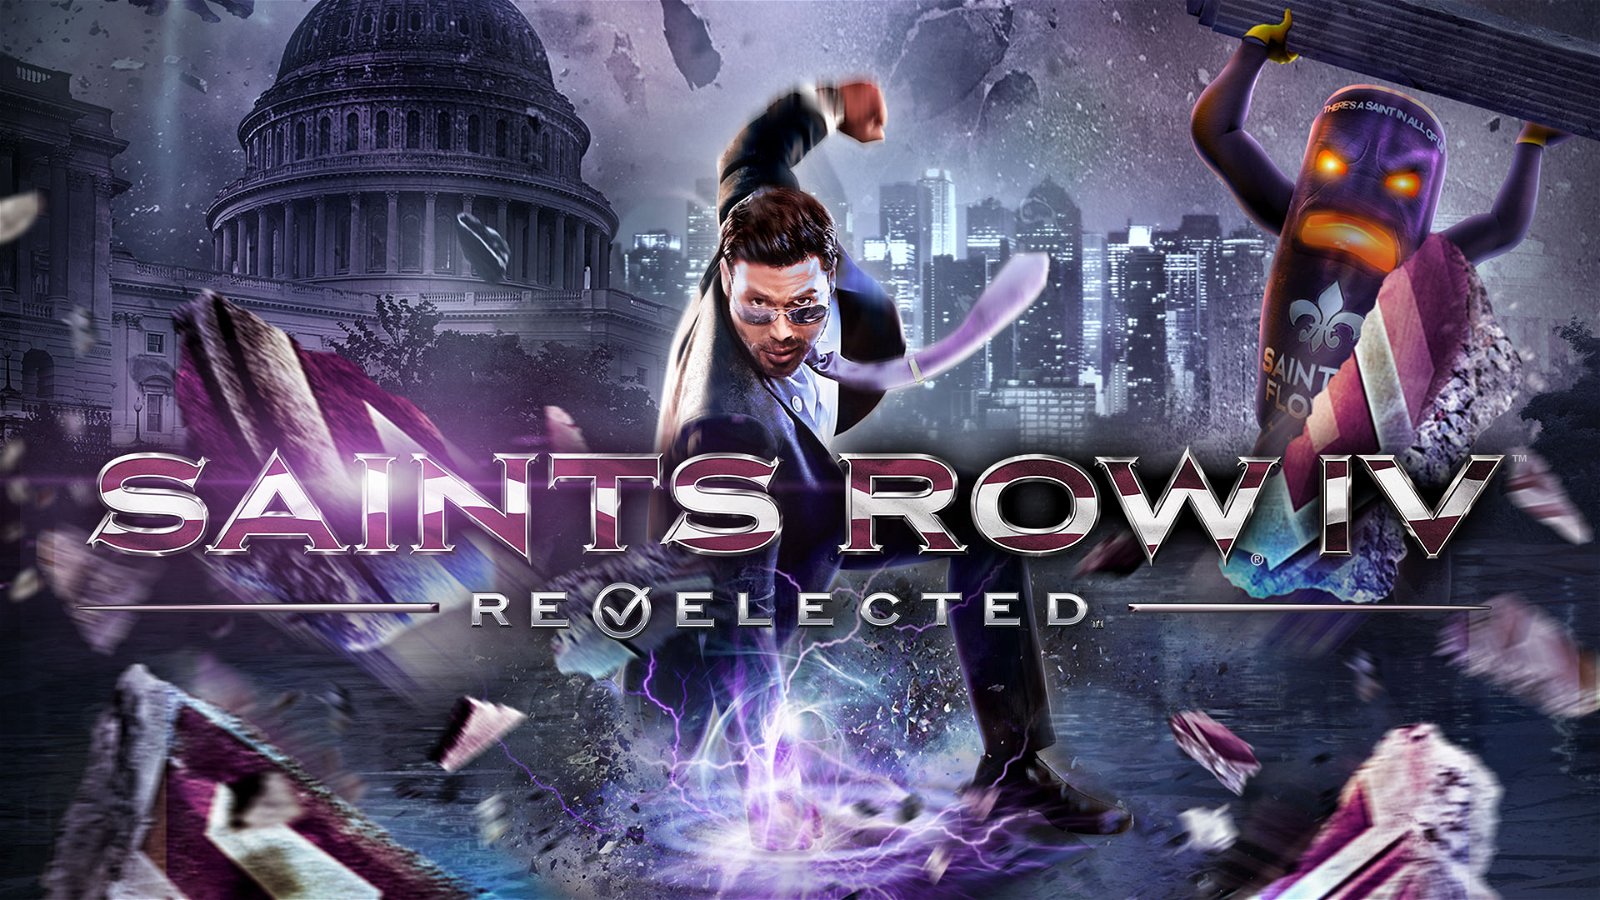 Saints Row IV Re-Elected Review